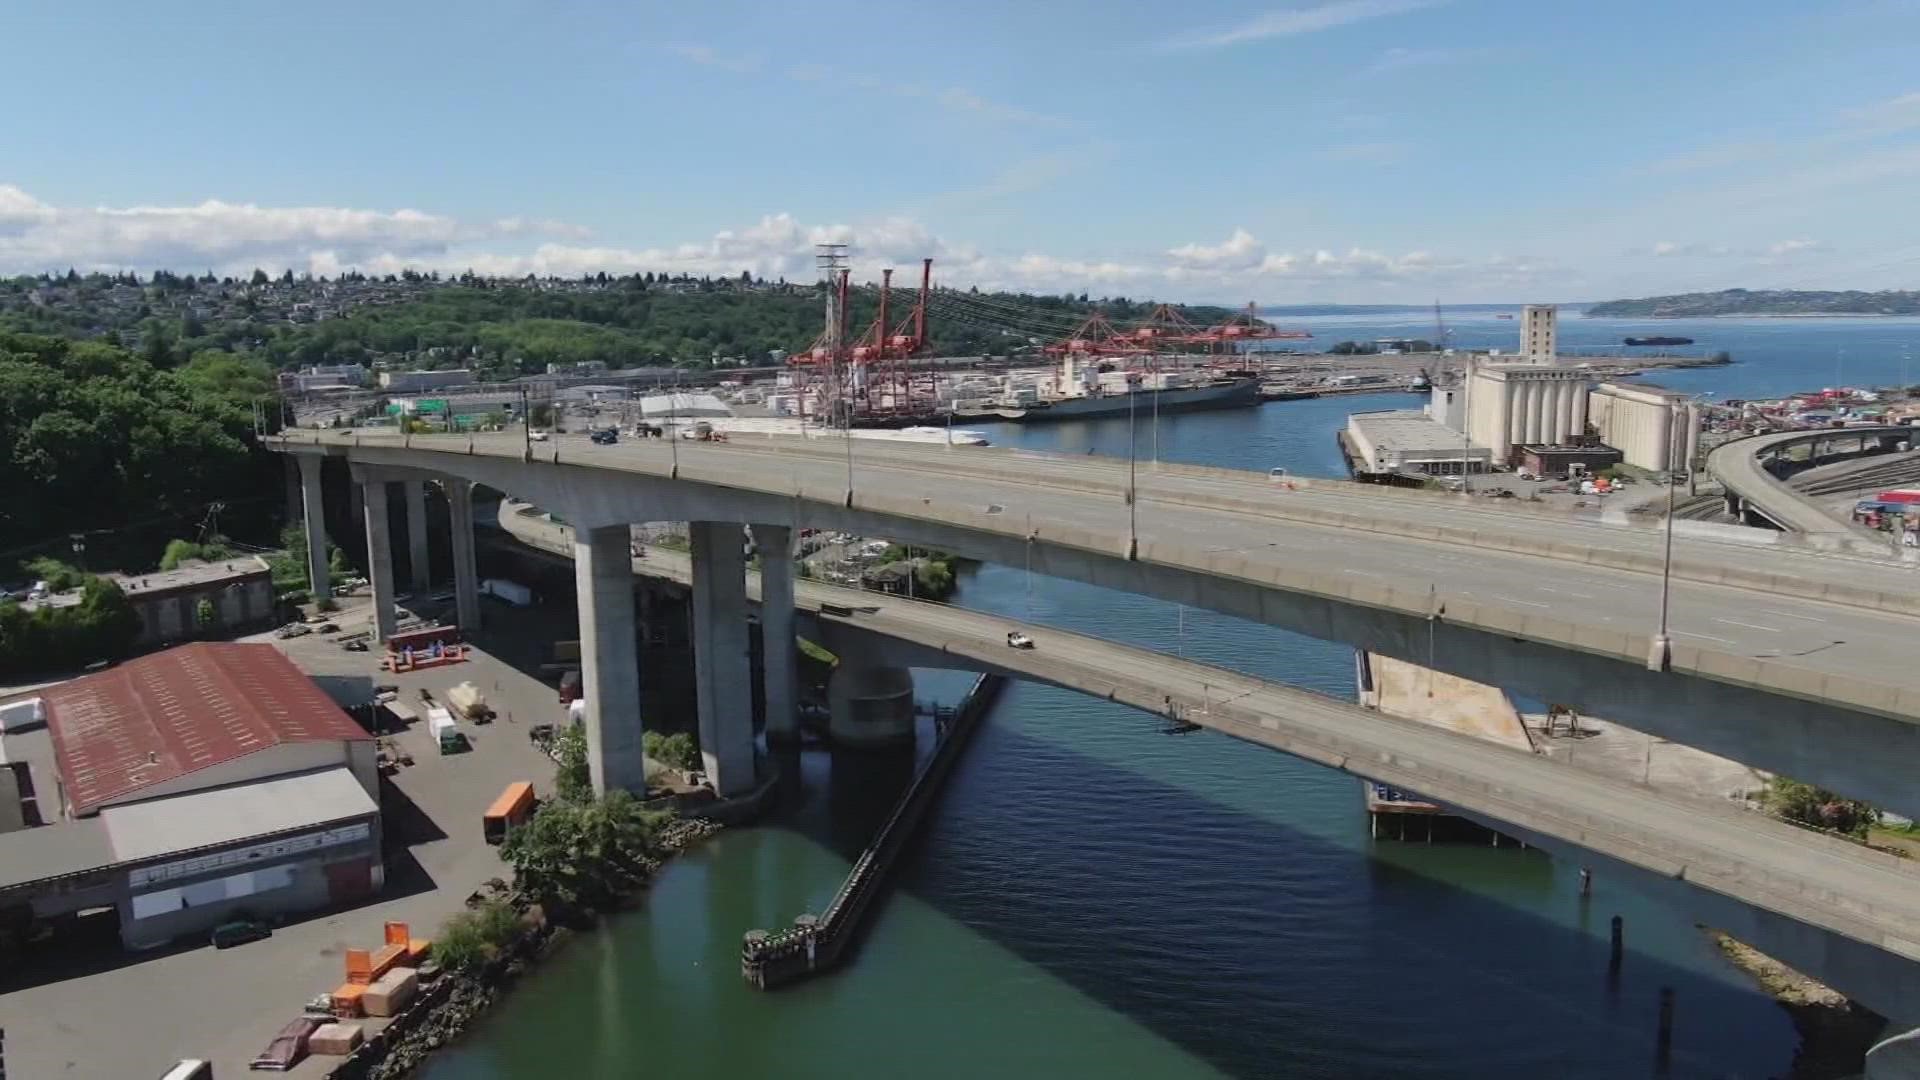 The West Seattle Bridge closed to traffic in March 2020 after workers observed growing cracks in its structure.